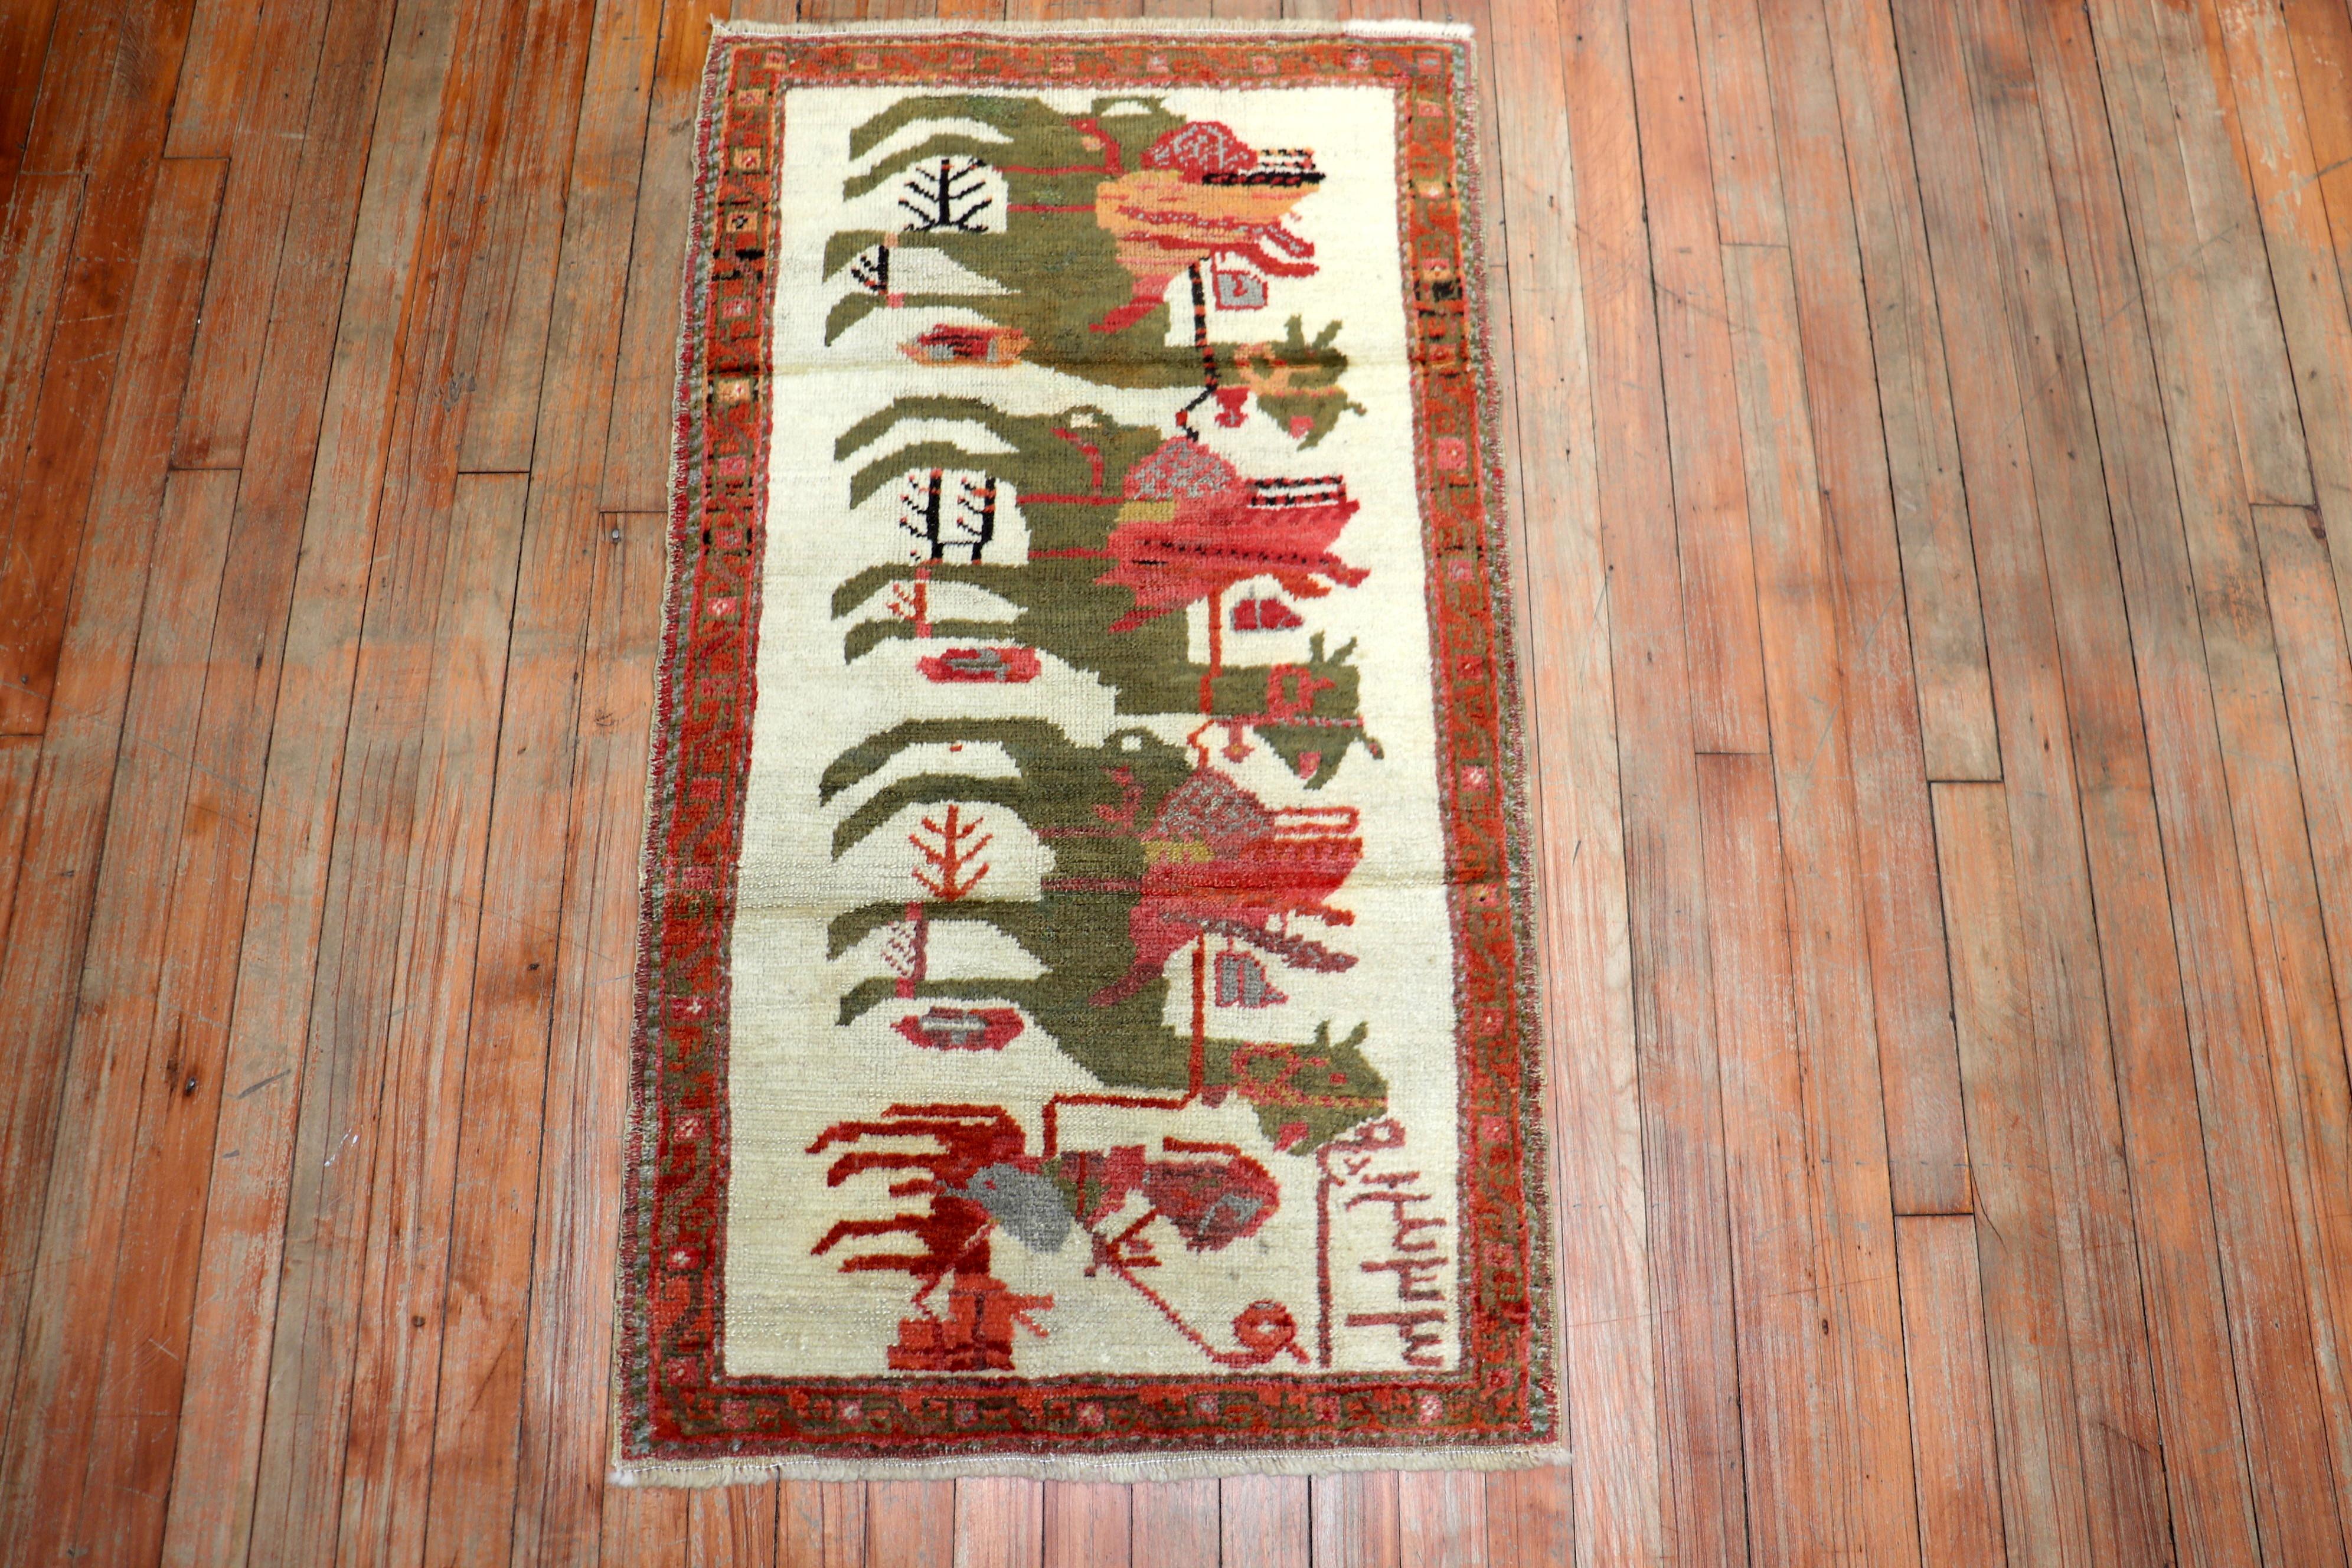 an early 20th Century Turkish rug with a pictorial camel animal design

Details
rug no.	r5498
size	2' 1